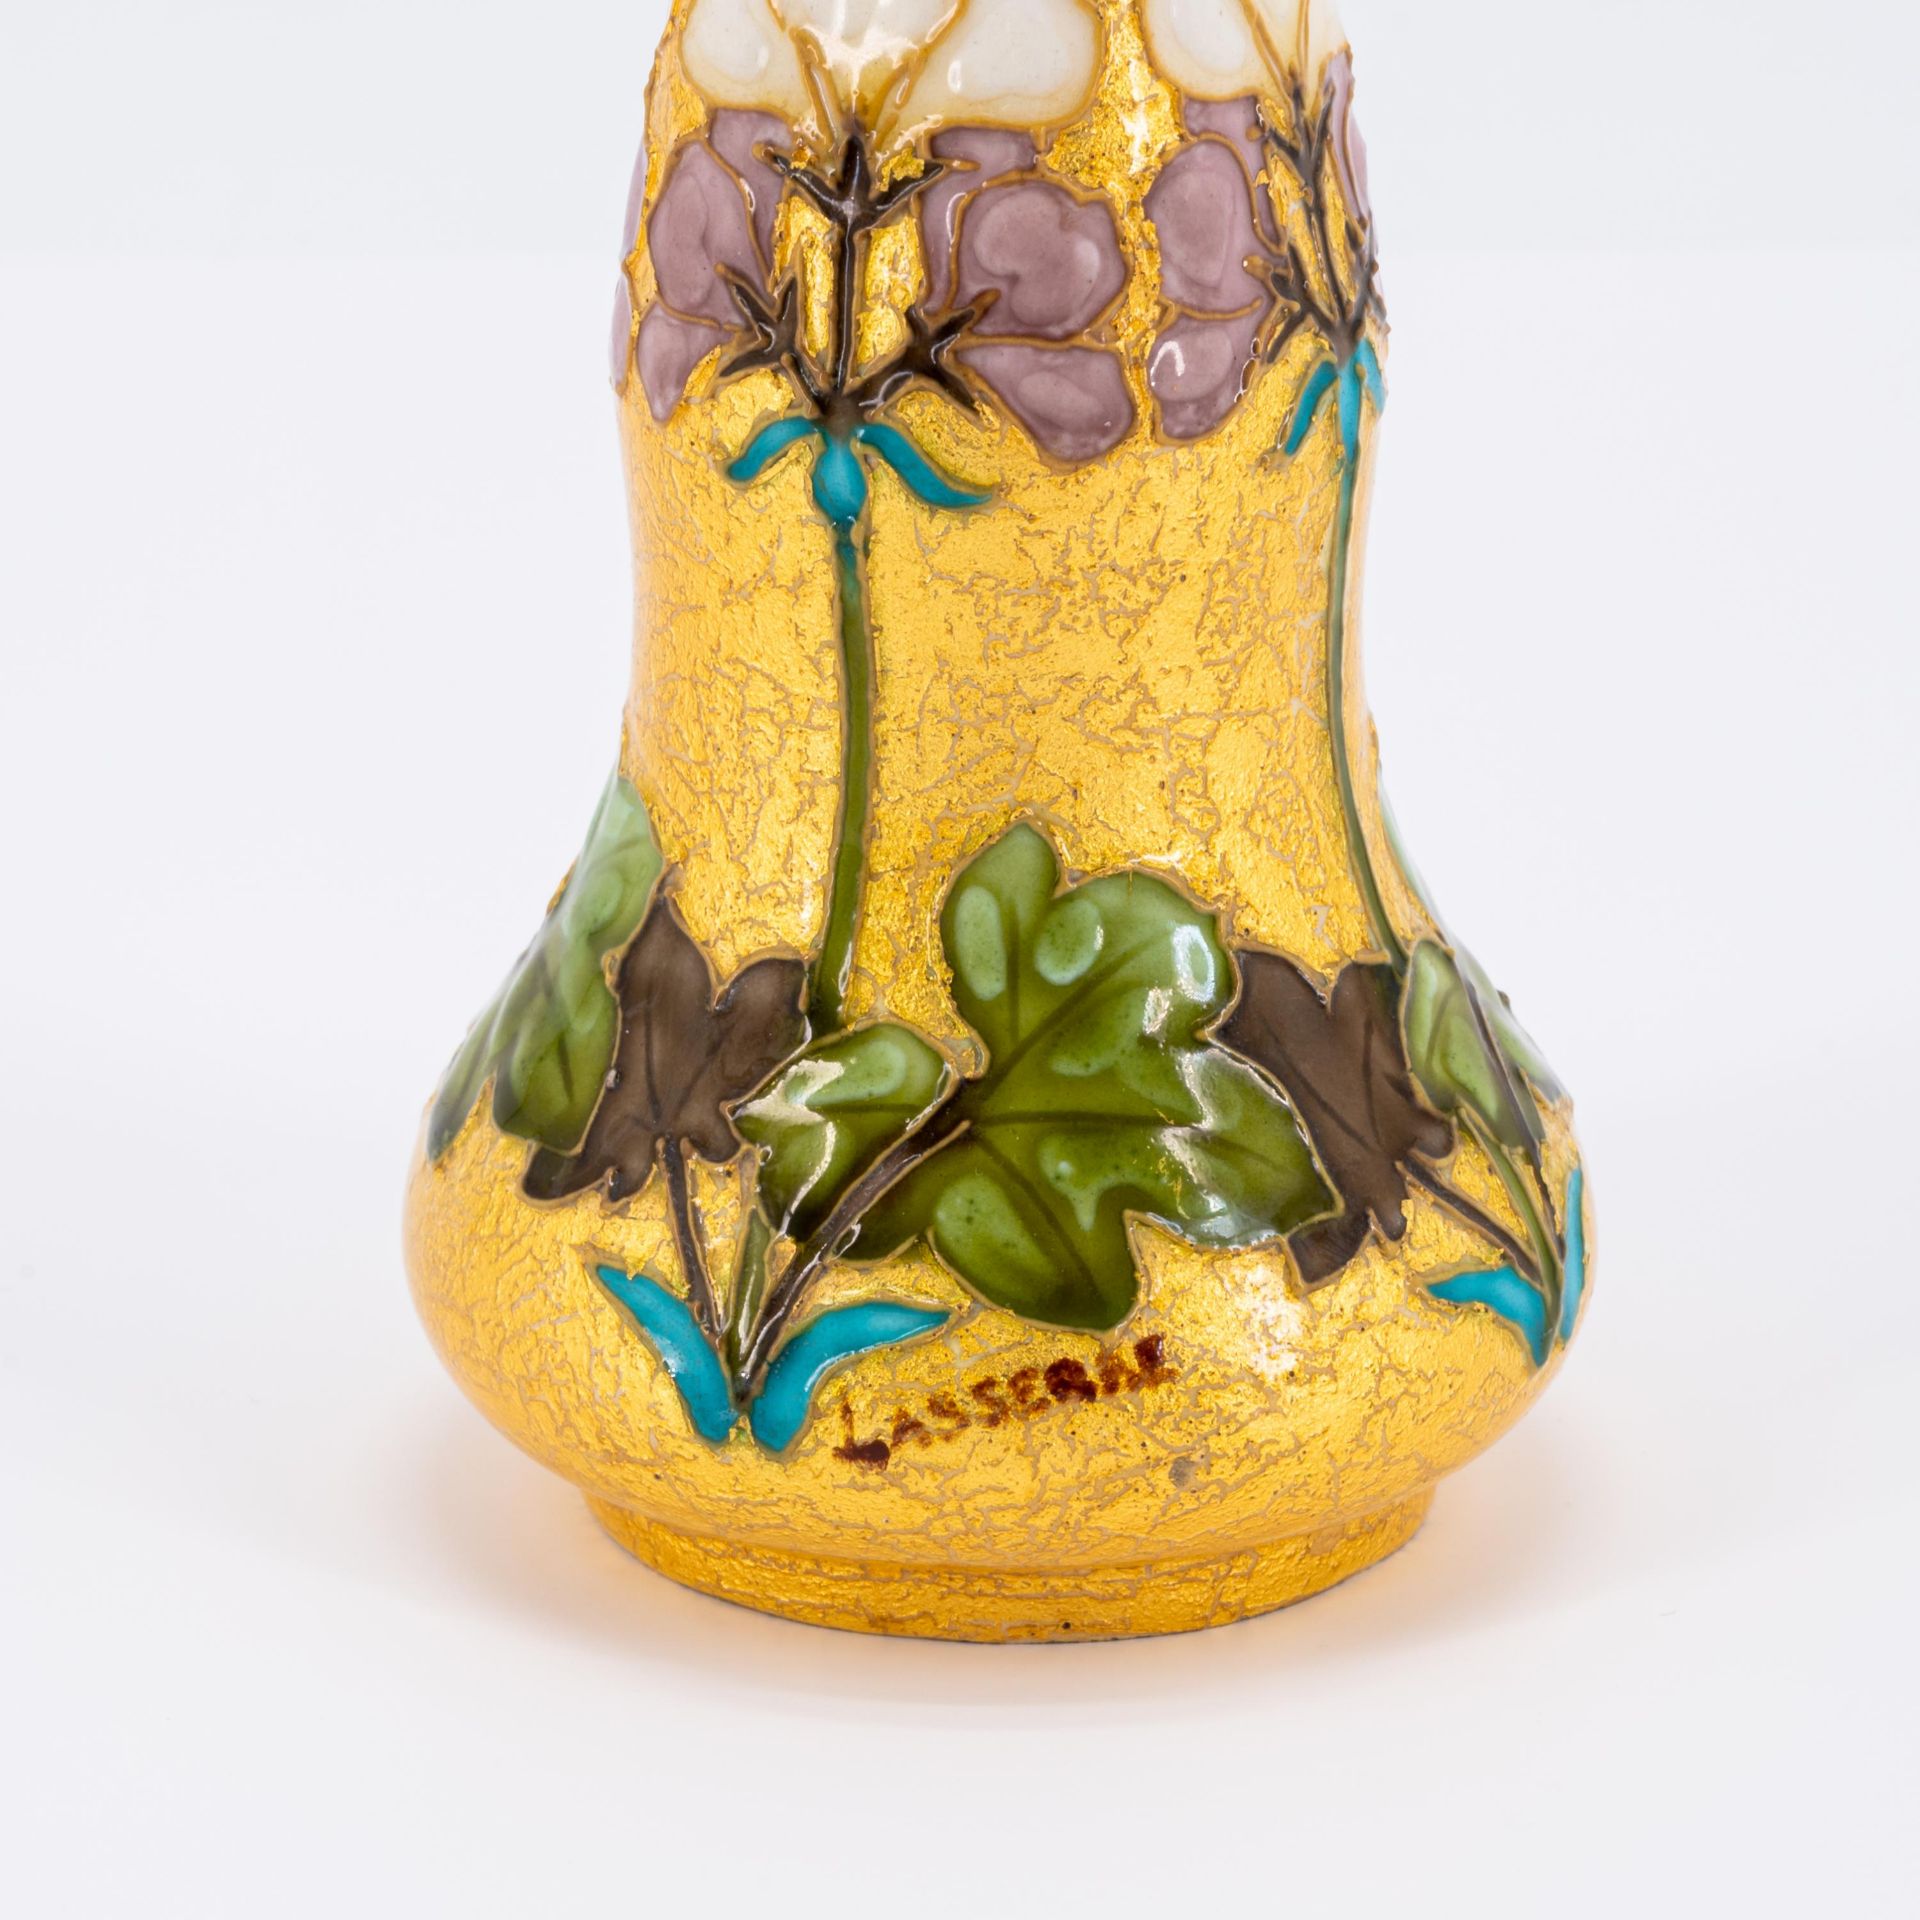 Small vase with floral decor - Image 7 of 7